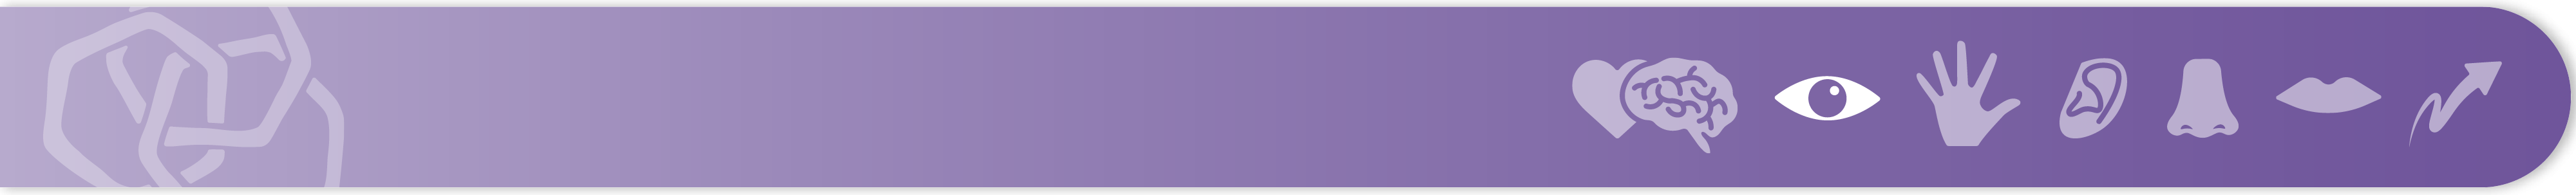 Section banner indicating the start of a new section. On the right, 7 icons depict the senses: a heart and brain, an eye, a hand, an ear, a nost, a mouth, and an arrow (movement). Chapter 2 banner is purple with the eye icon highlighted.